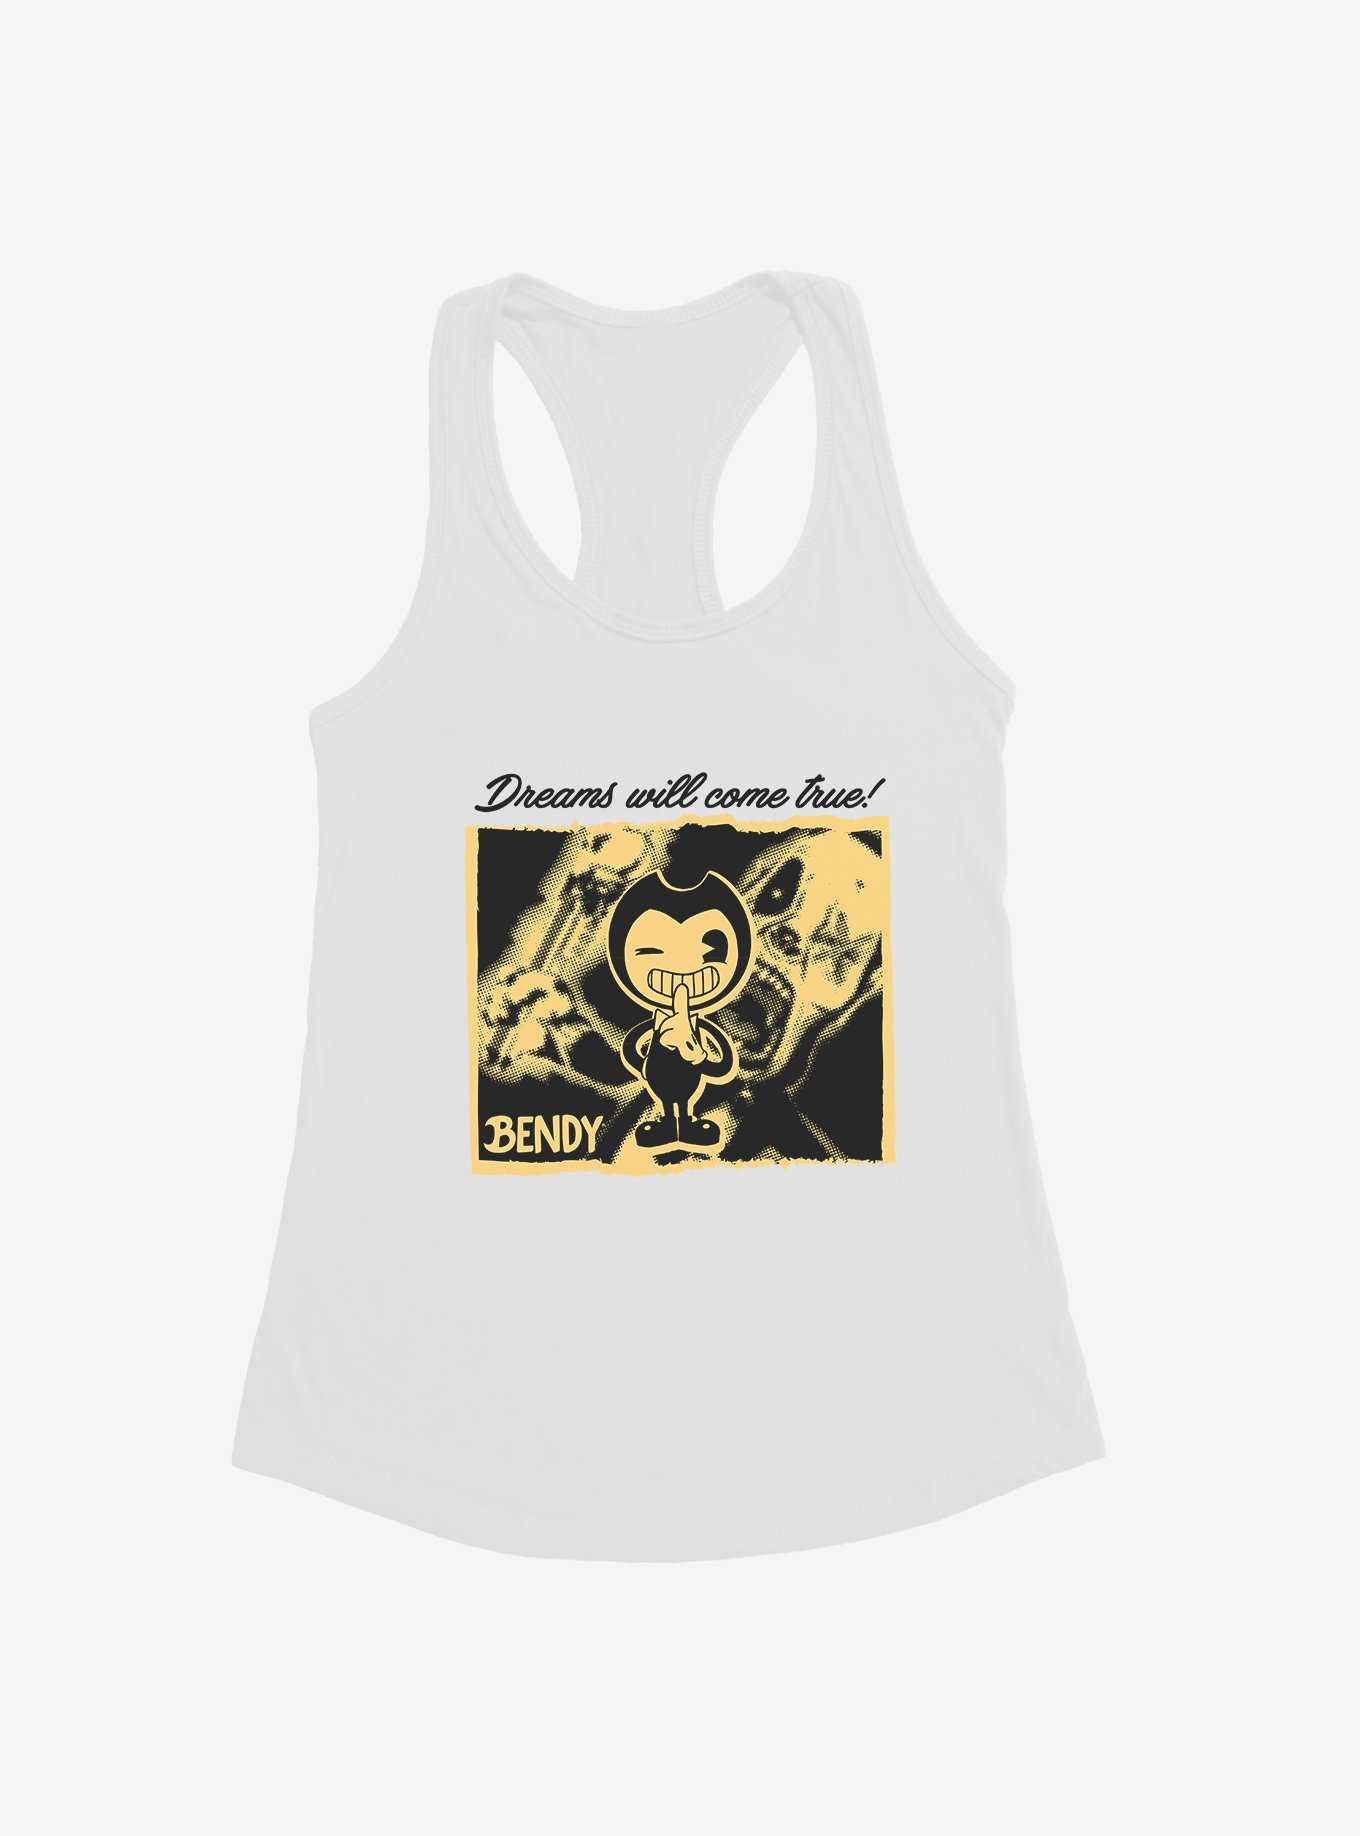 Bendy And The Ink Machine Dreams Will Come True! Girls Tank, , hi-res